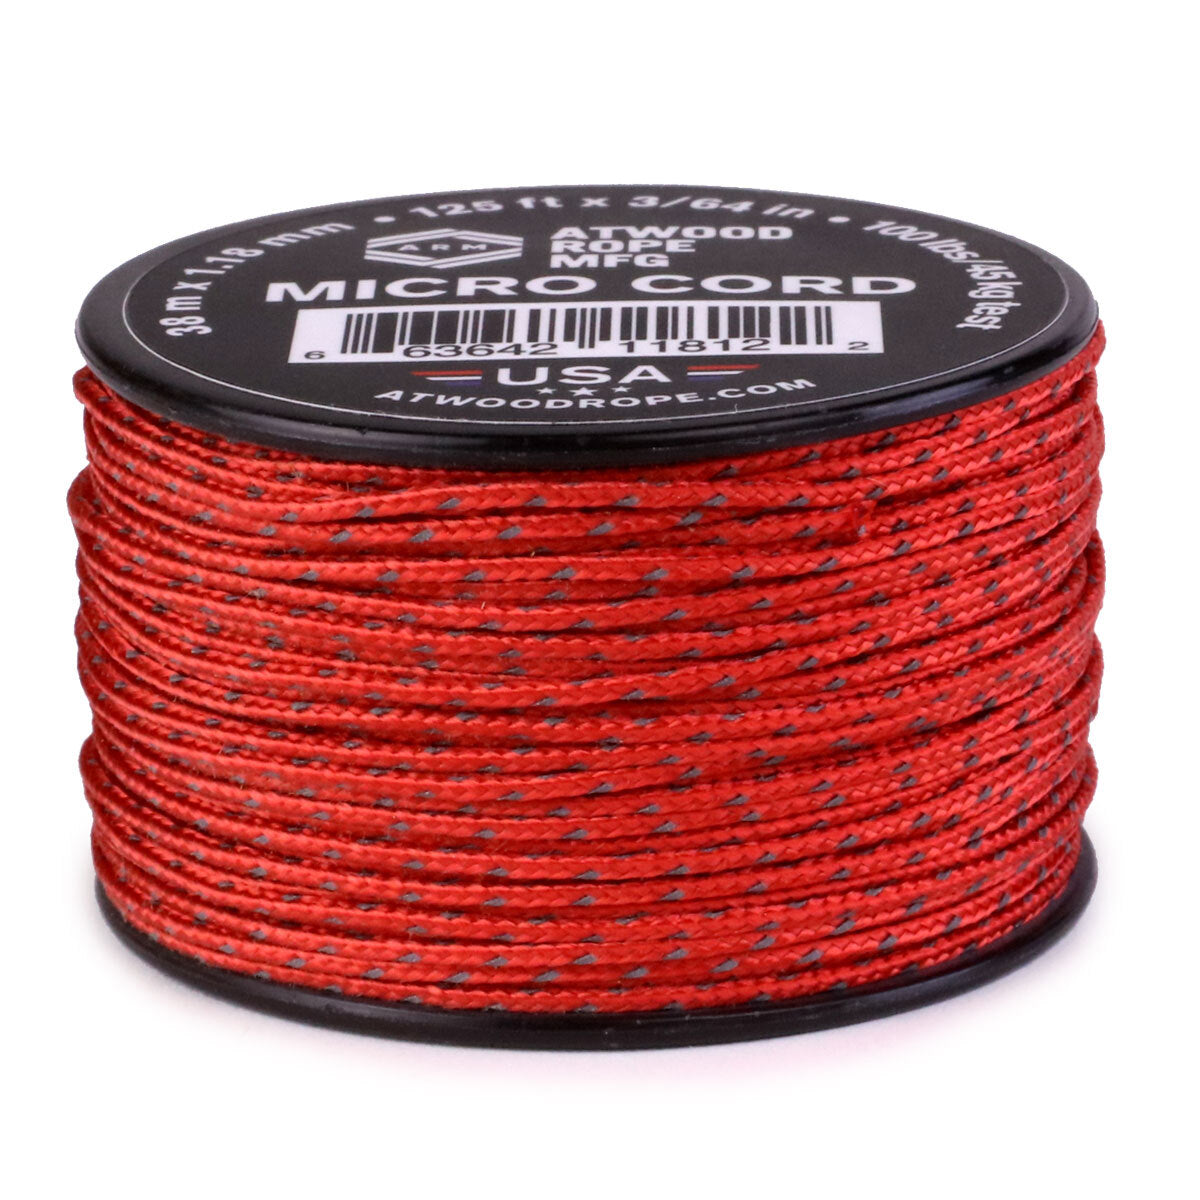 Atwood Rope Micro Cord Paracord 1.18mm (3/64) X 125ft Spool USA Made